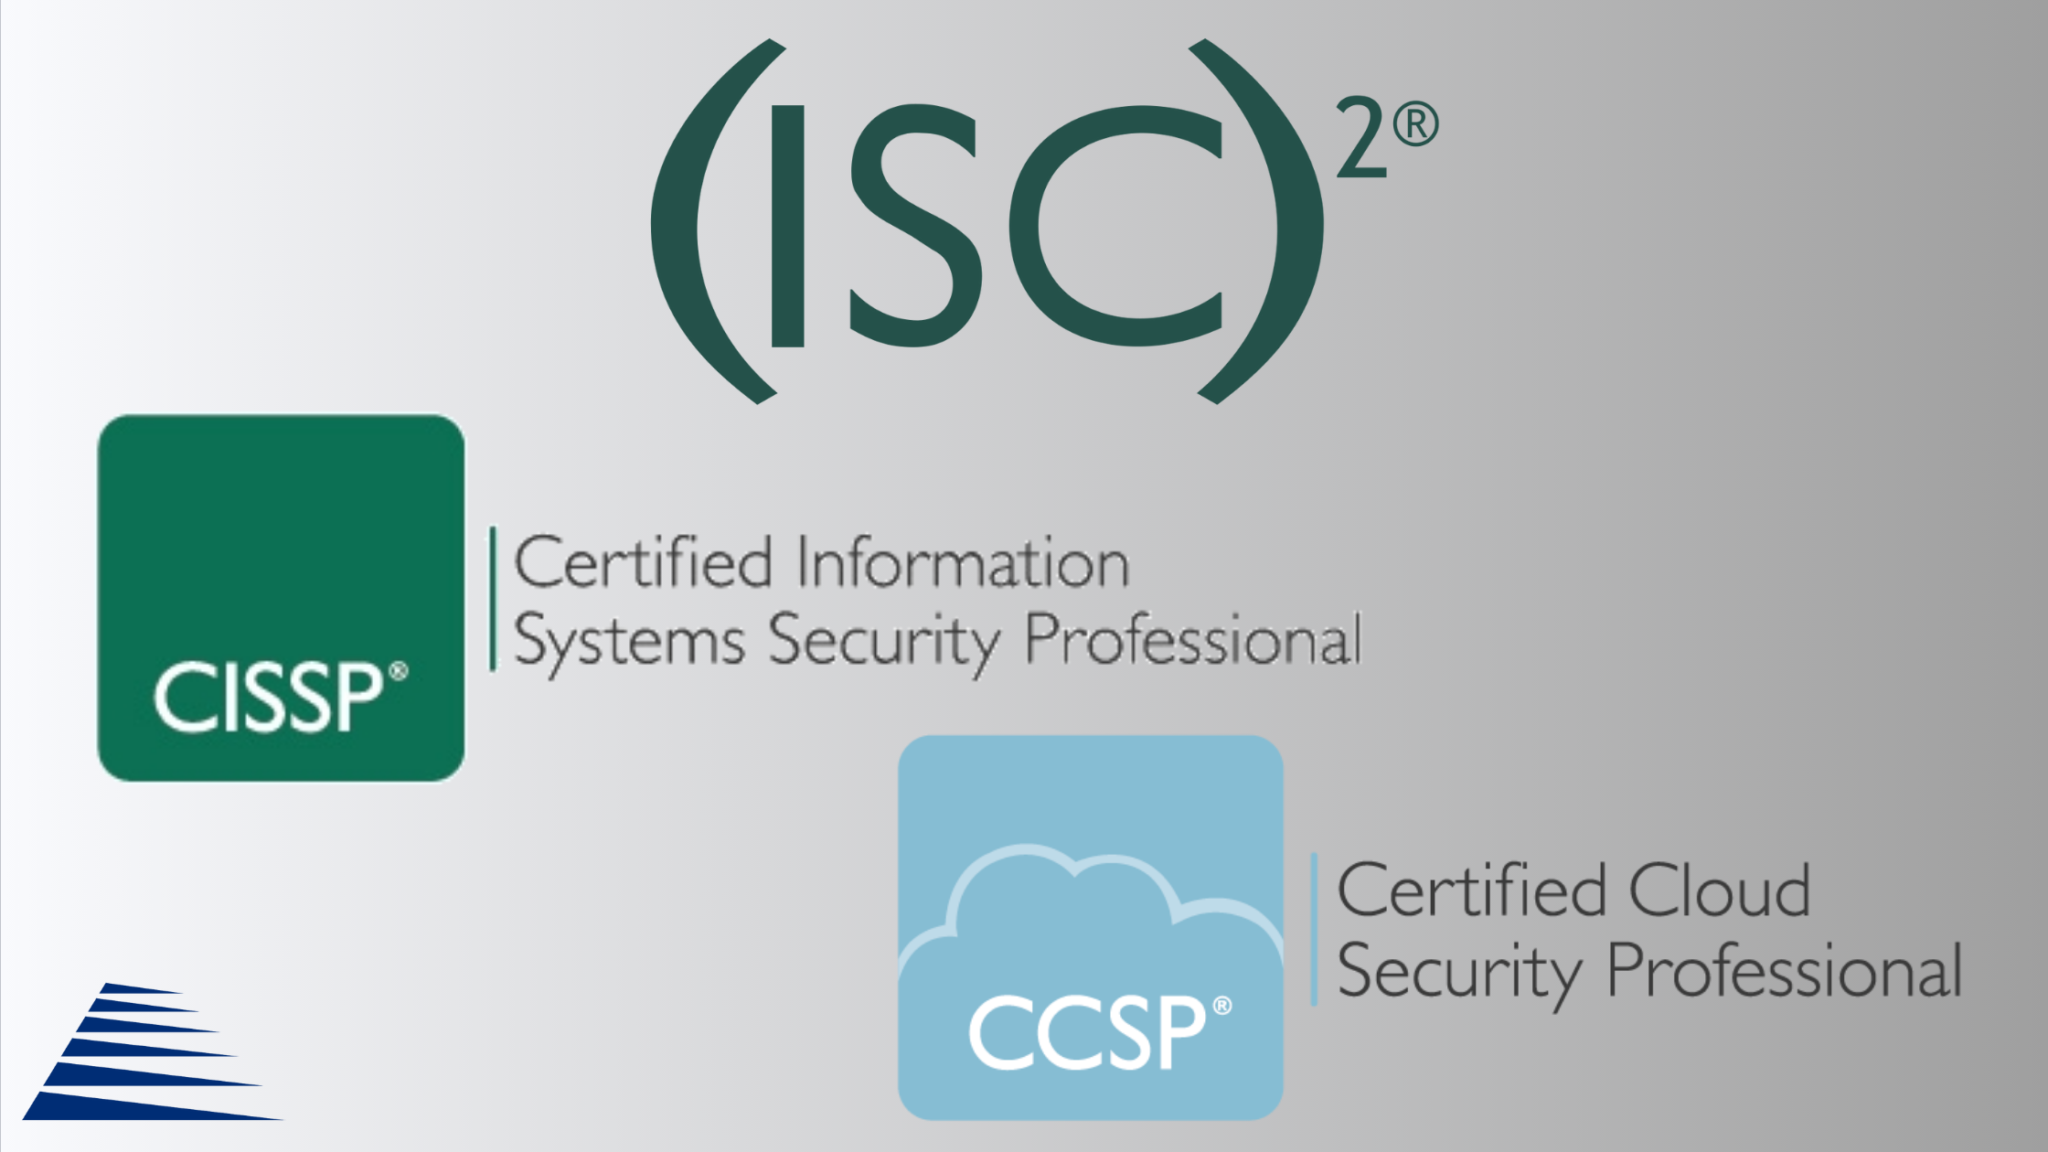 IT Certification from ISC2, CISSP and CCSP logos